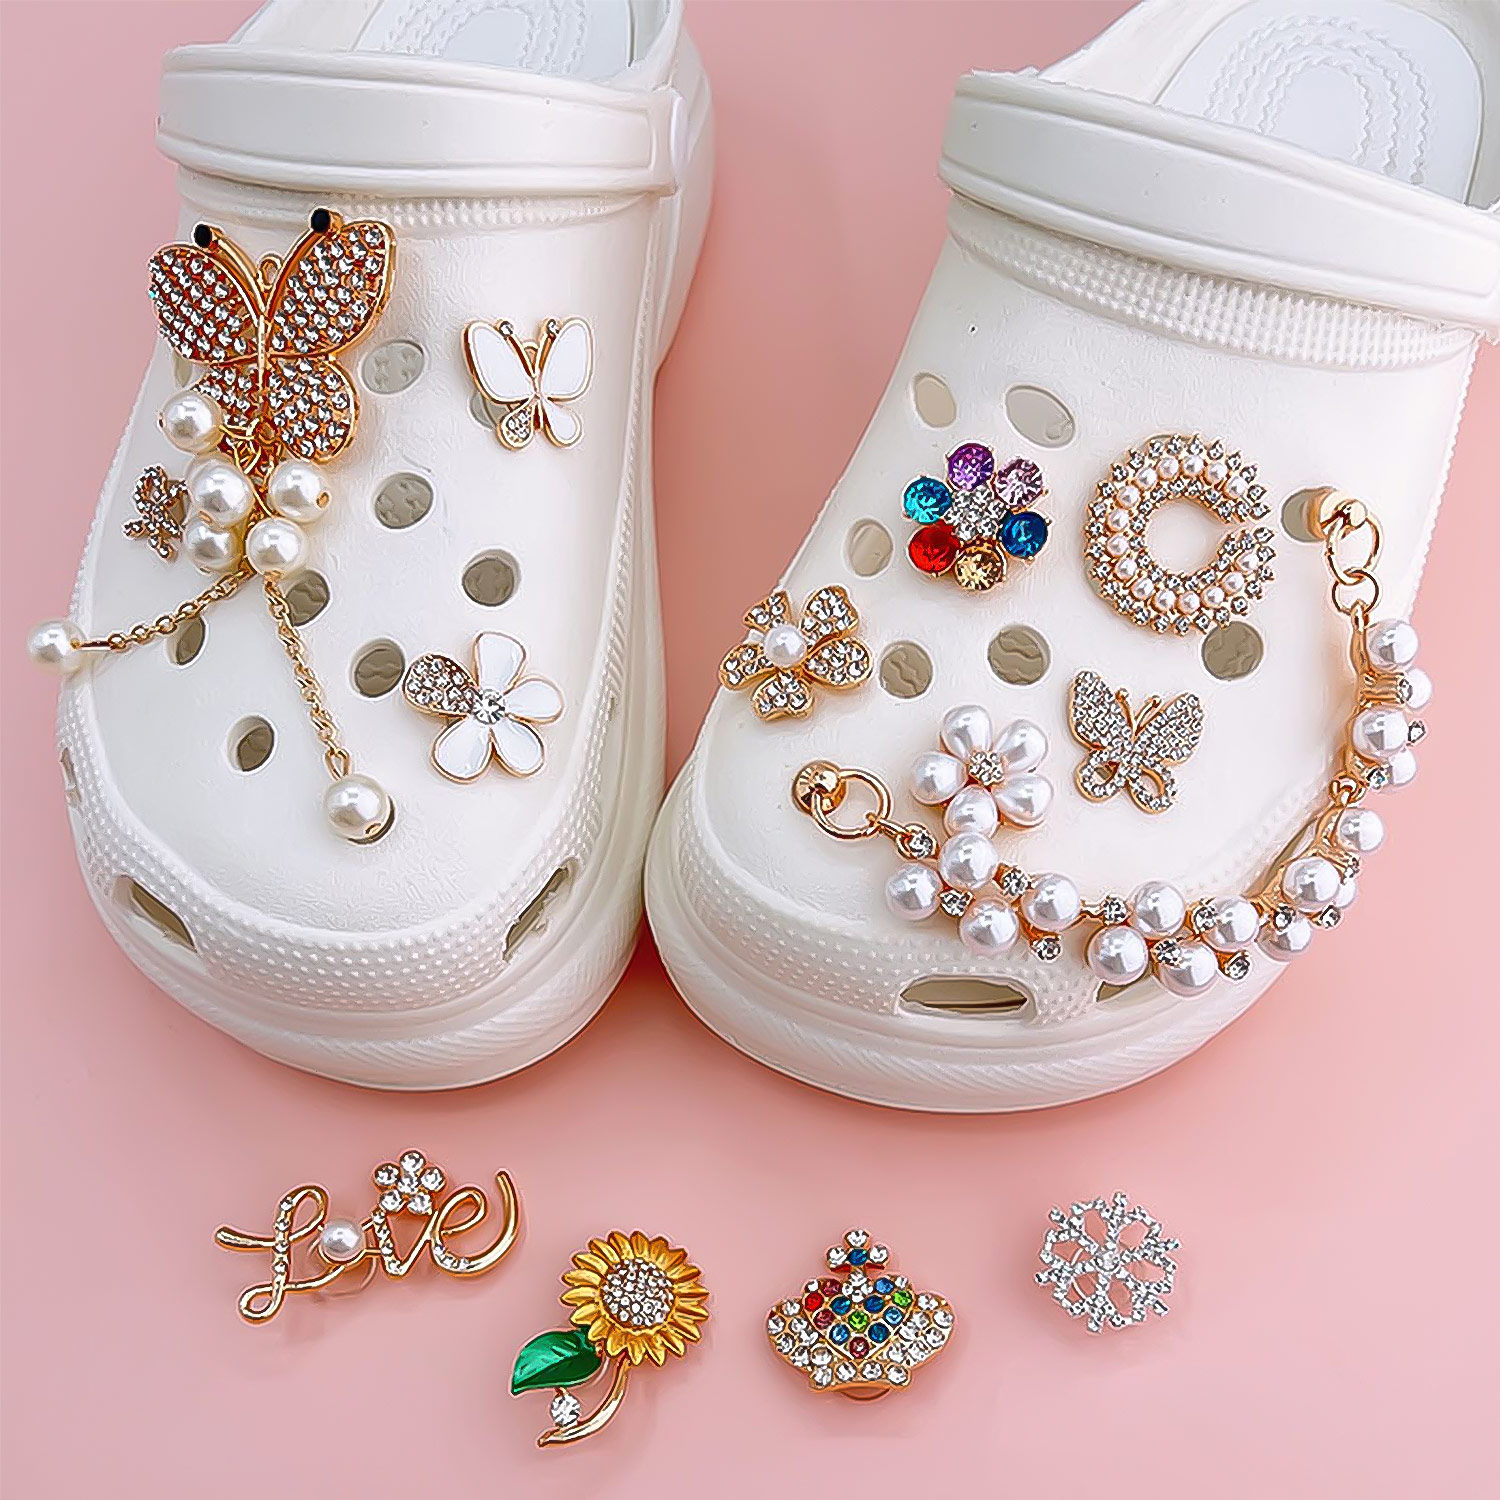 Pinkiou Croc Accessories Charms for Women and Girls, Bling Shoe